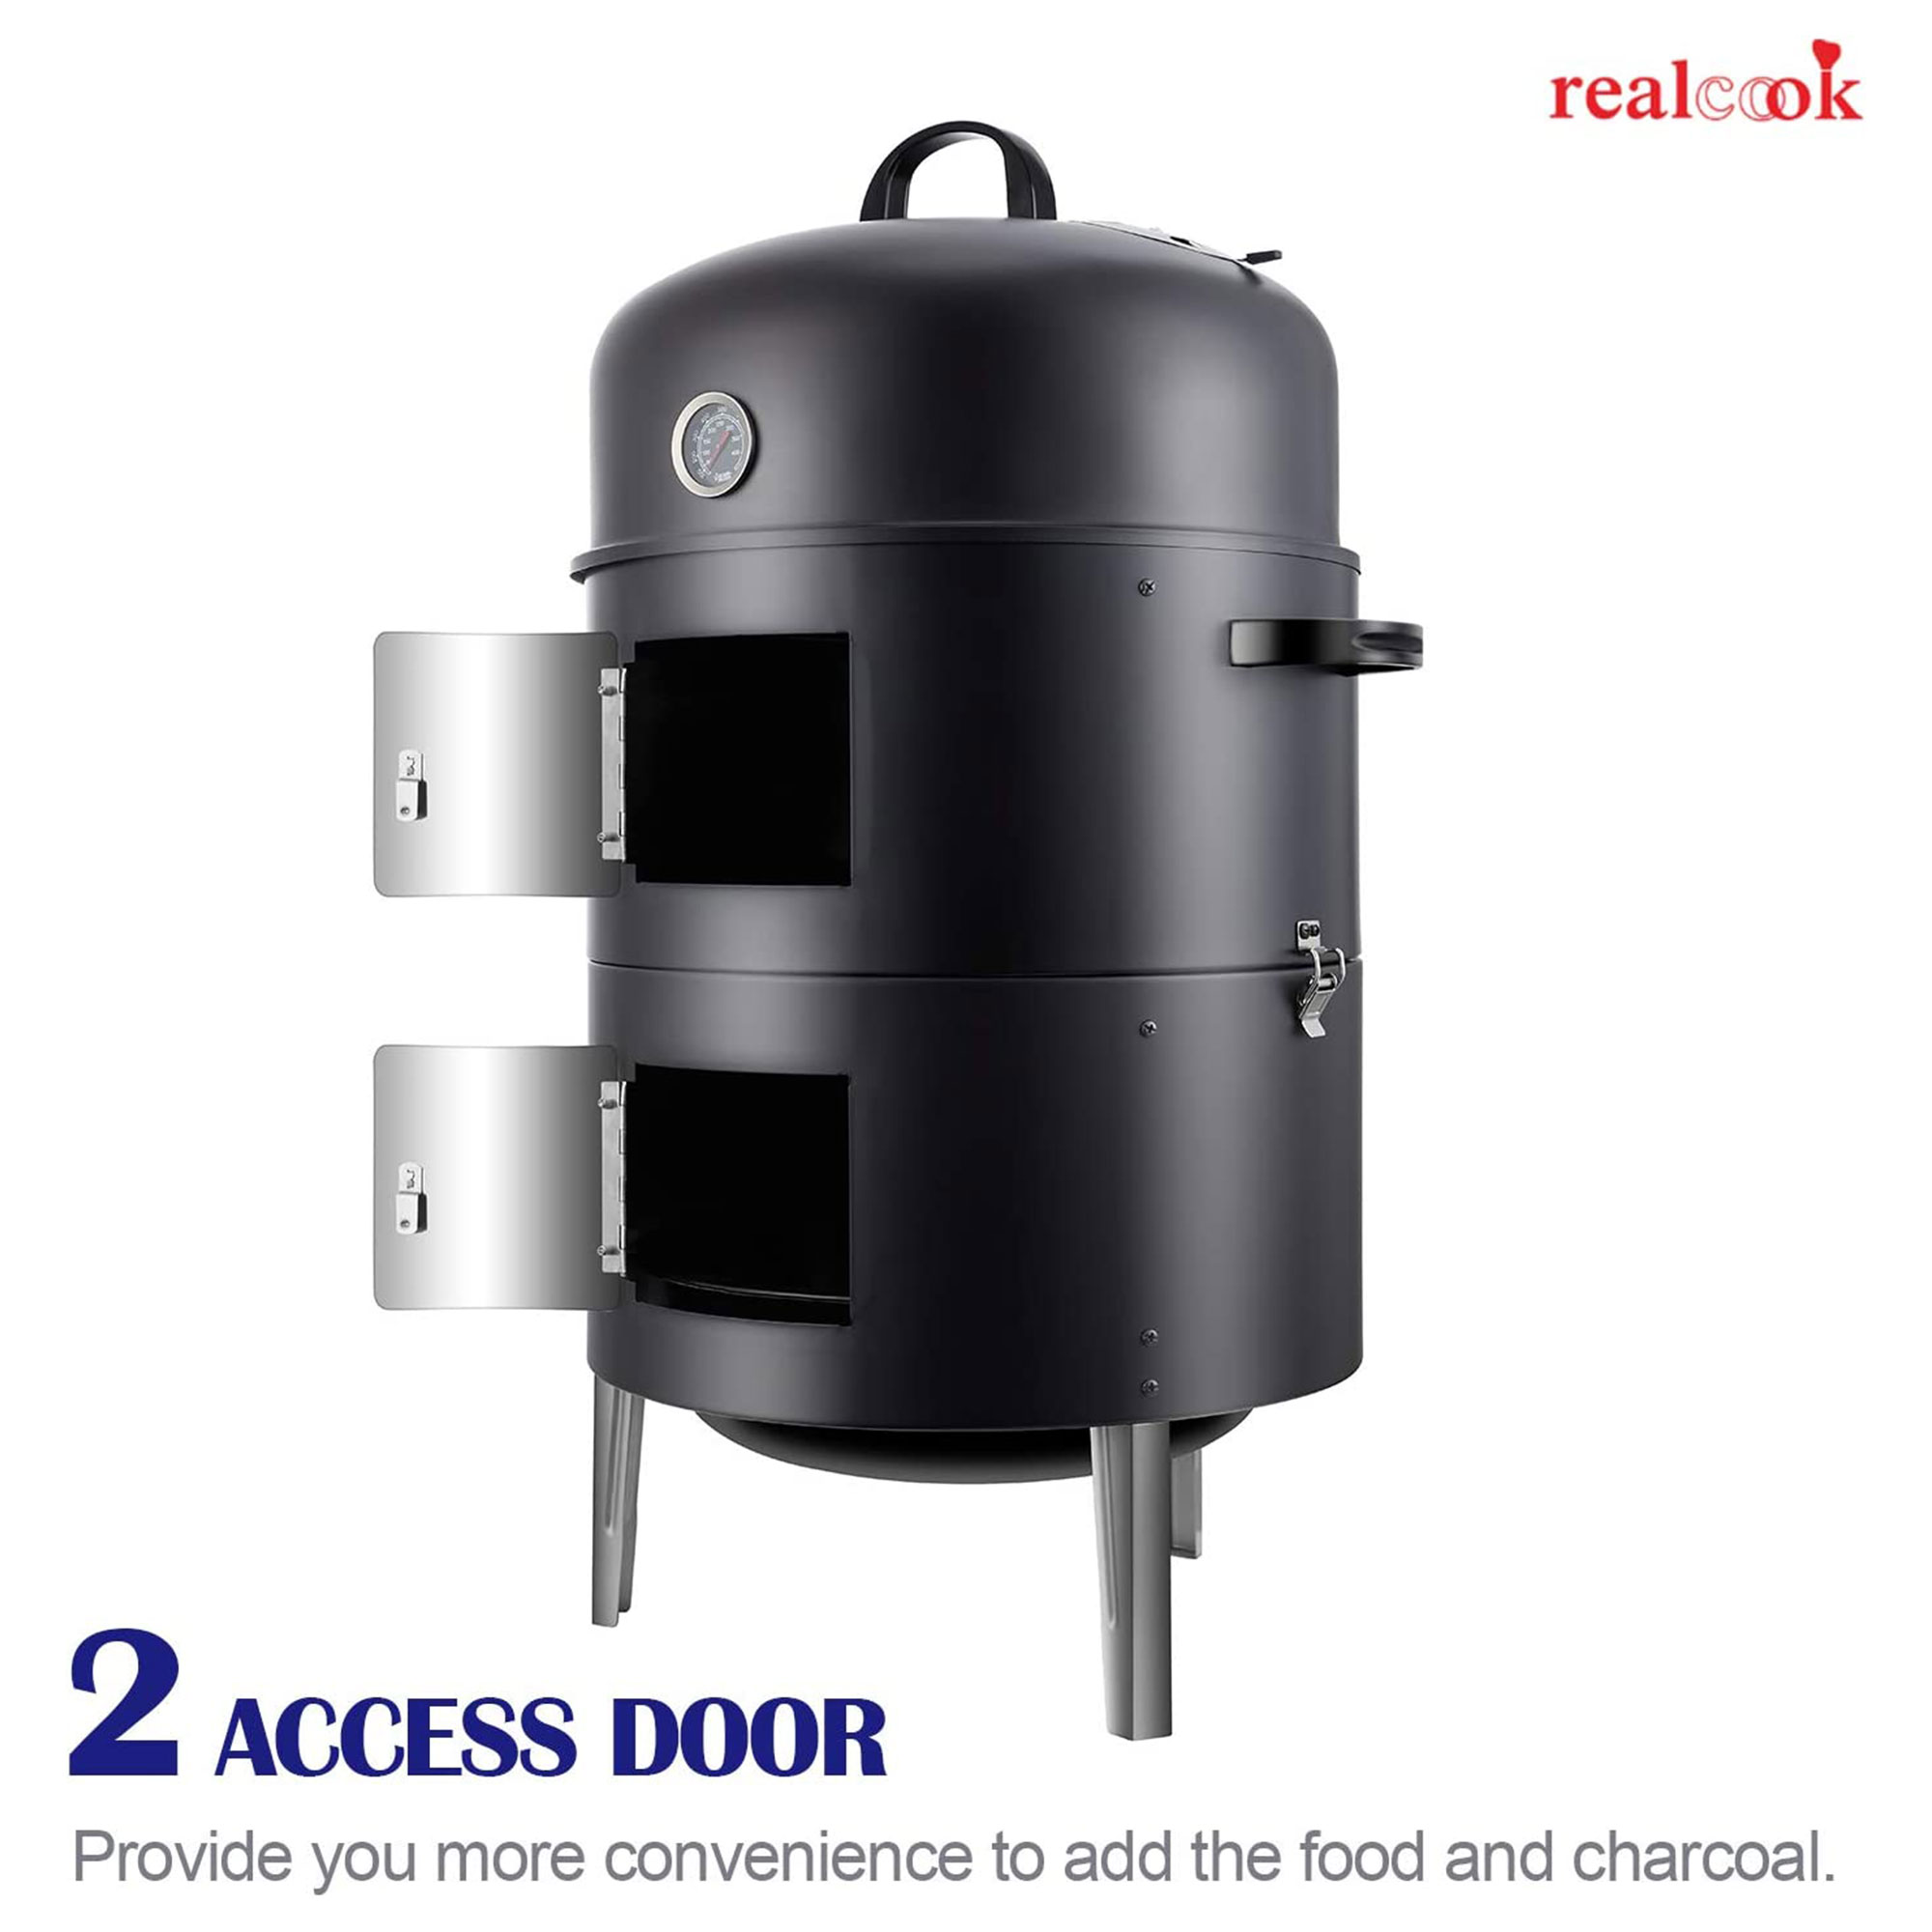 Realcook 17 inch Vertical Heavy Duty Steel Charcoal Outdoor Smoker, Black - image 5 of 9